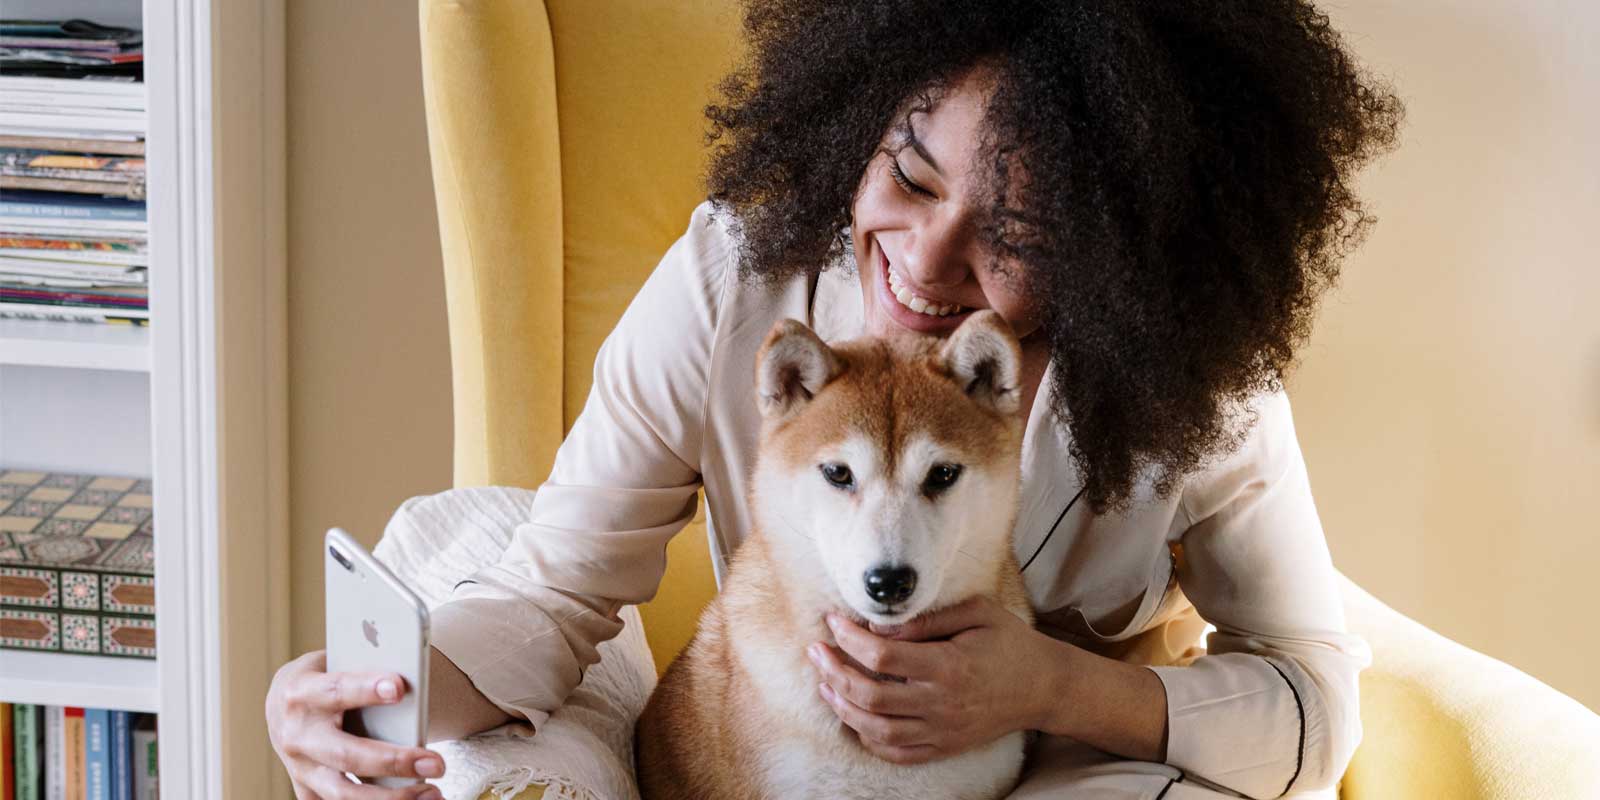 Woman preventing pet separation anxiety in dog